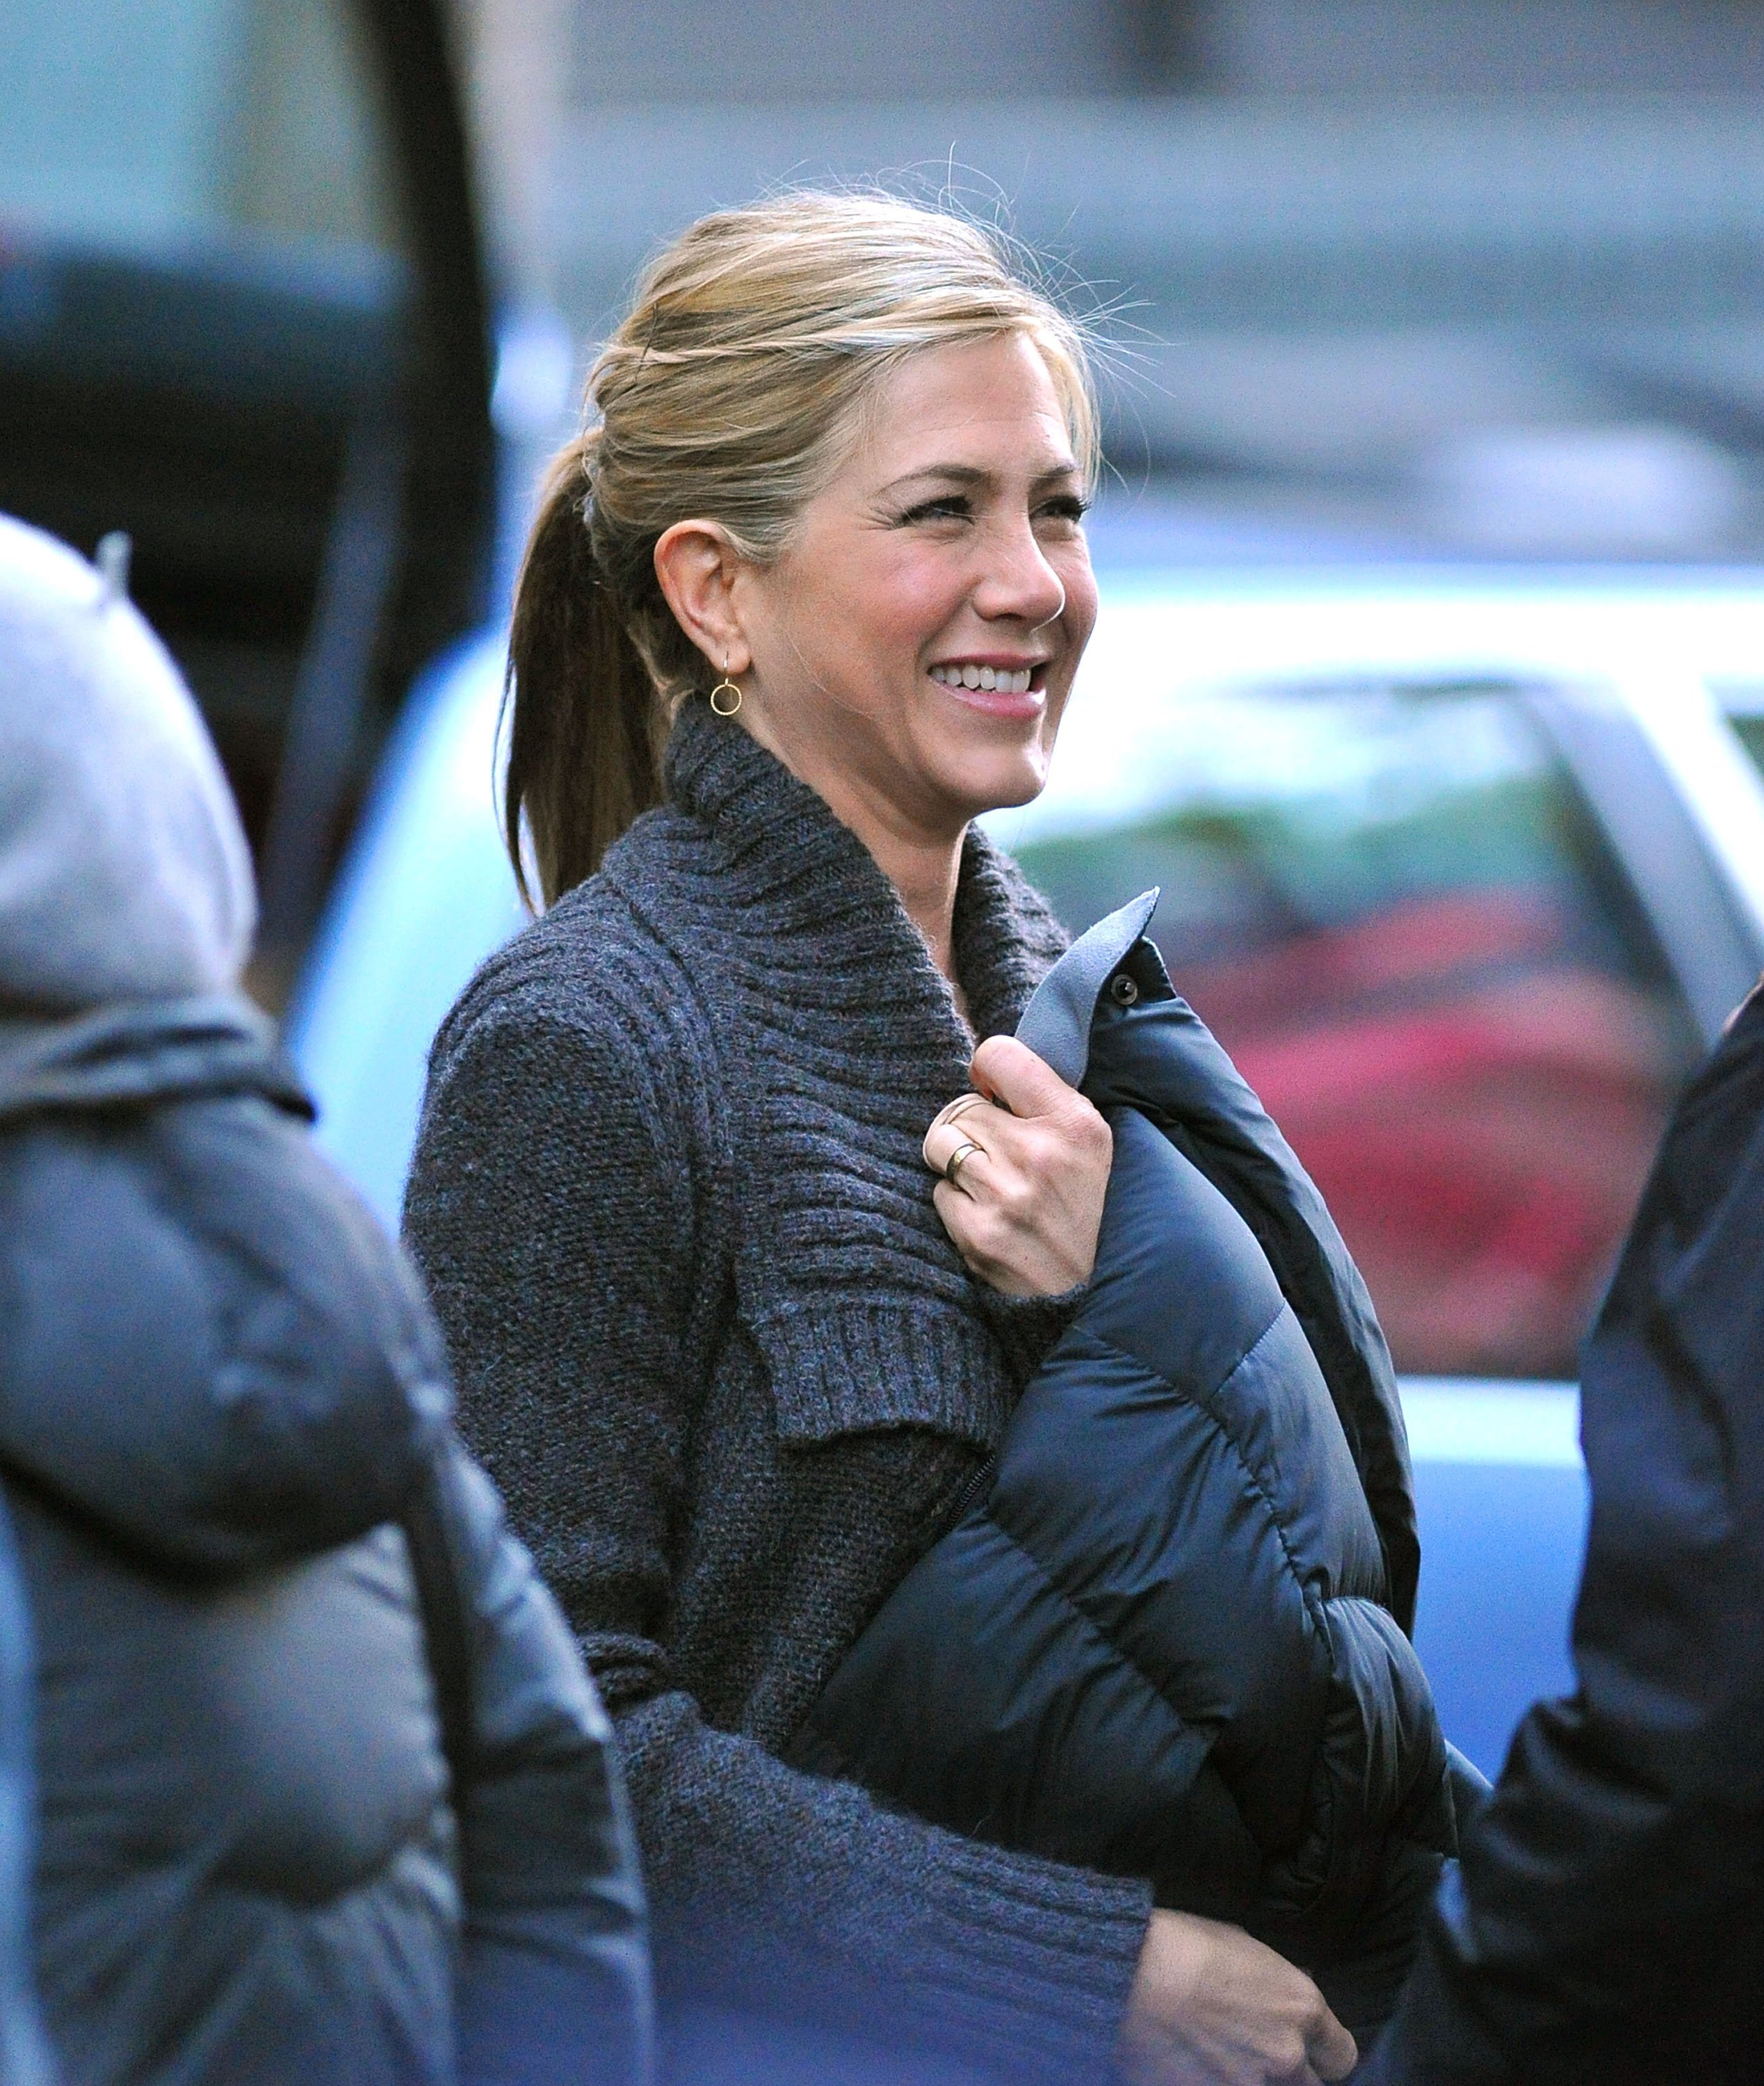 Jennifer Aniston seen on location for "spirit of adventure" on the streets of Manhattan on November 19, 2010 in New York City.  |  Source: Getty Images